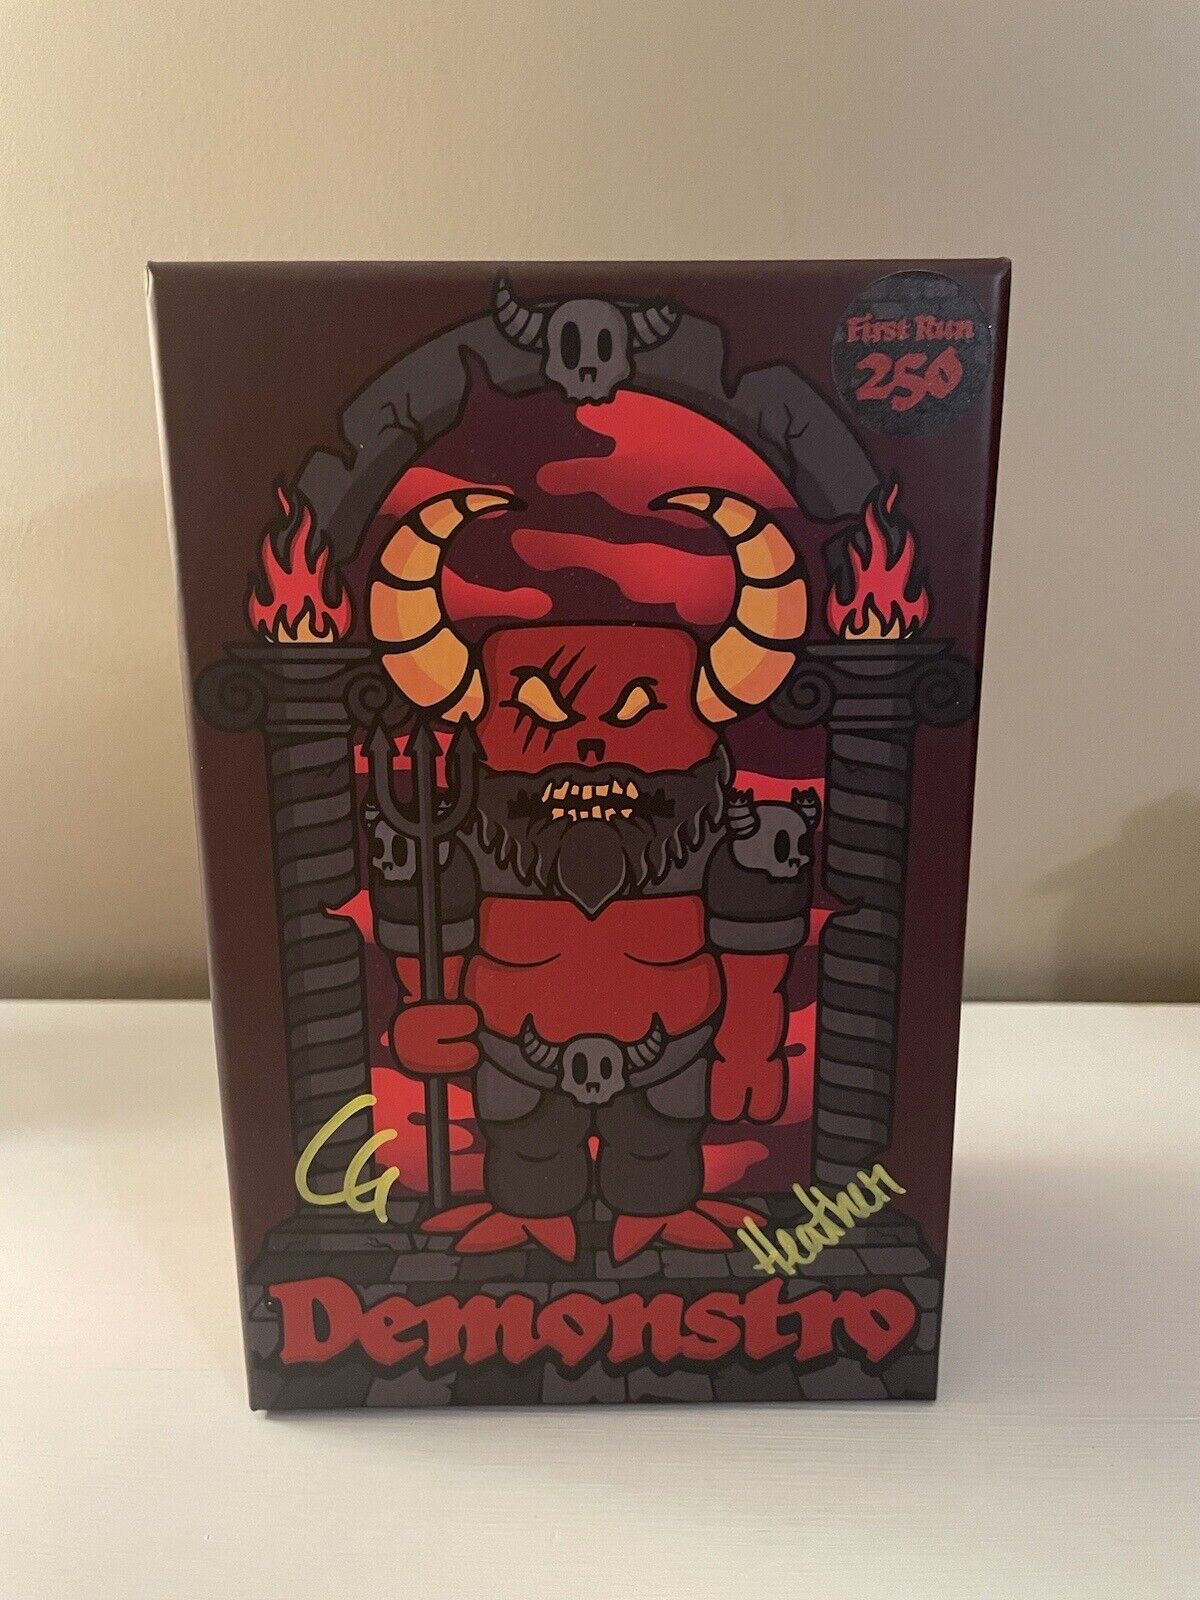 Mischief Toys DEMONSTRO First Run LE250 Signed by Chris + Heather 